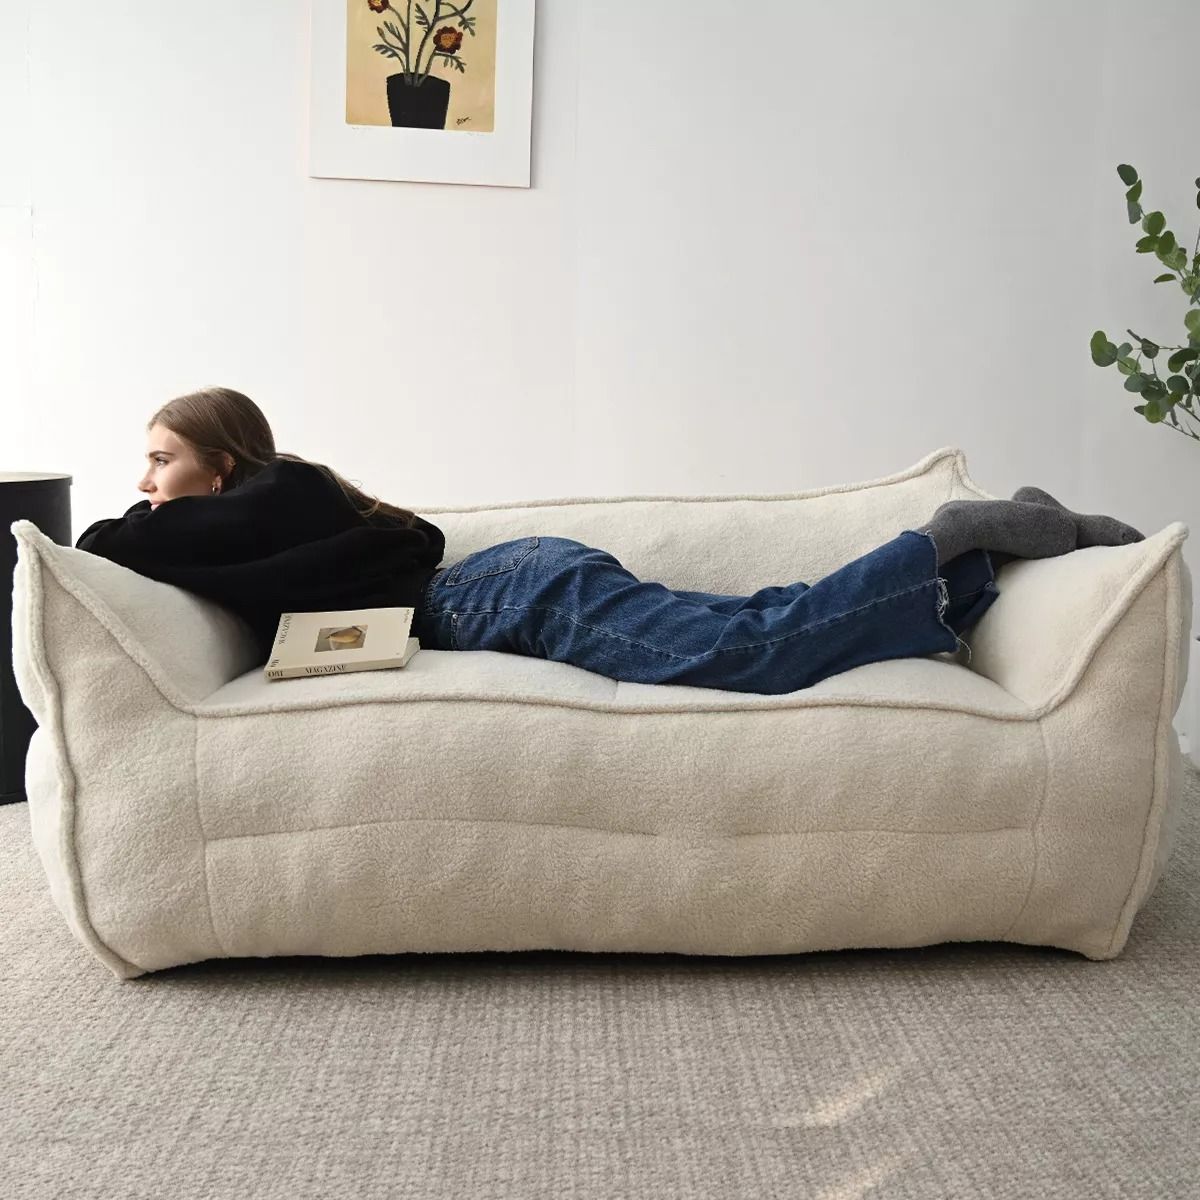 Ultimate Comfort: The Best Bean Bag Chairs for Adults